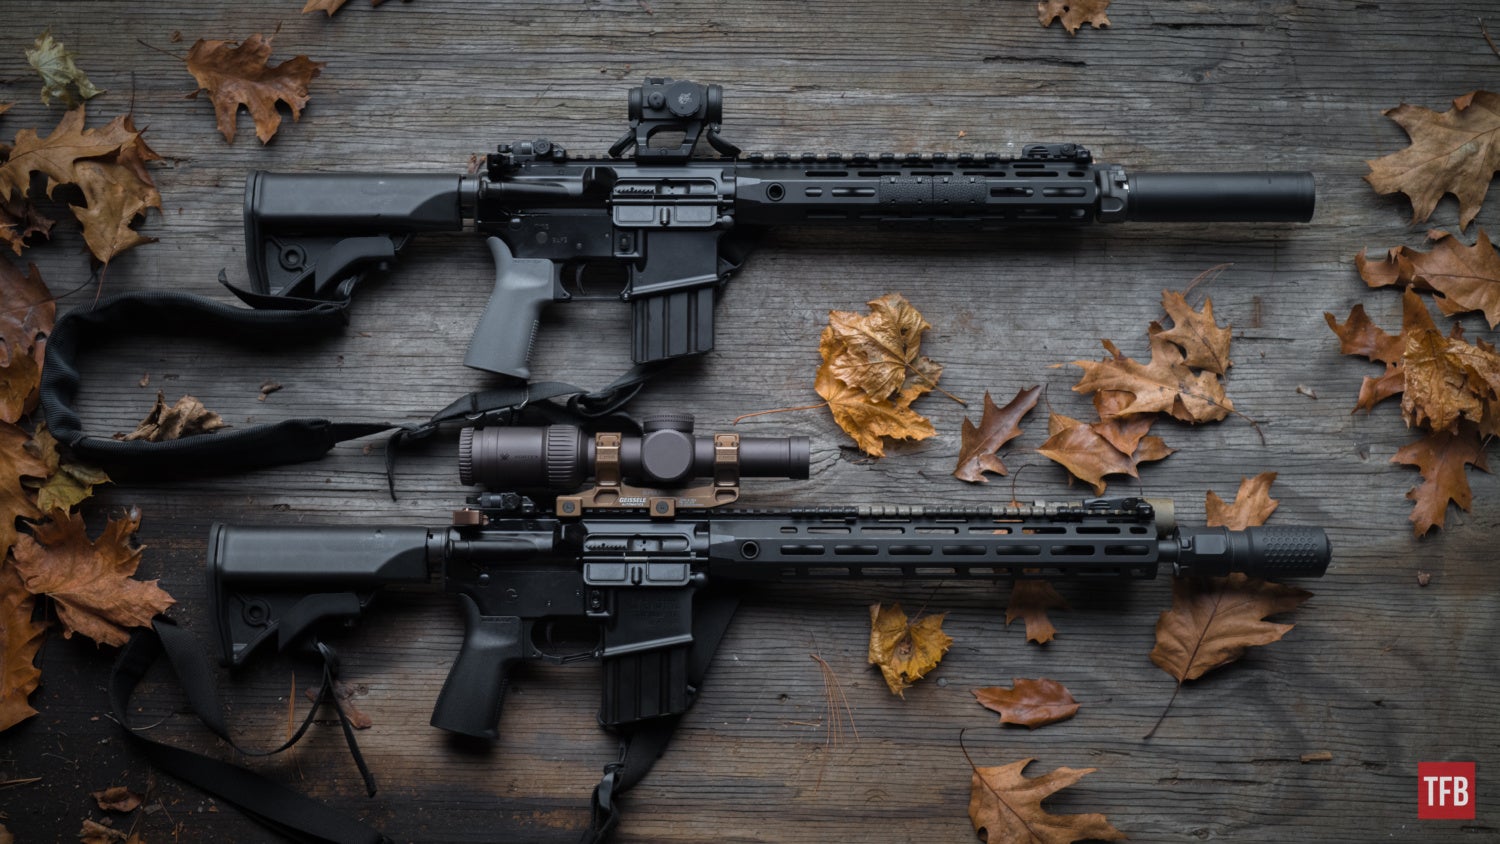 SILENCER SATURDAY #305: Thankful for Suppressors